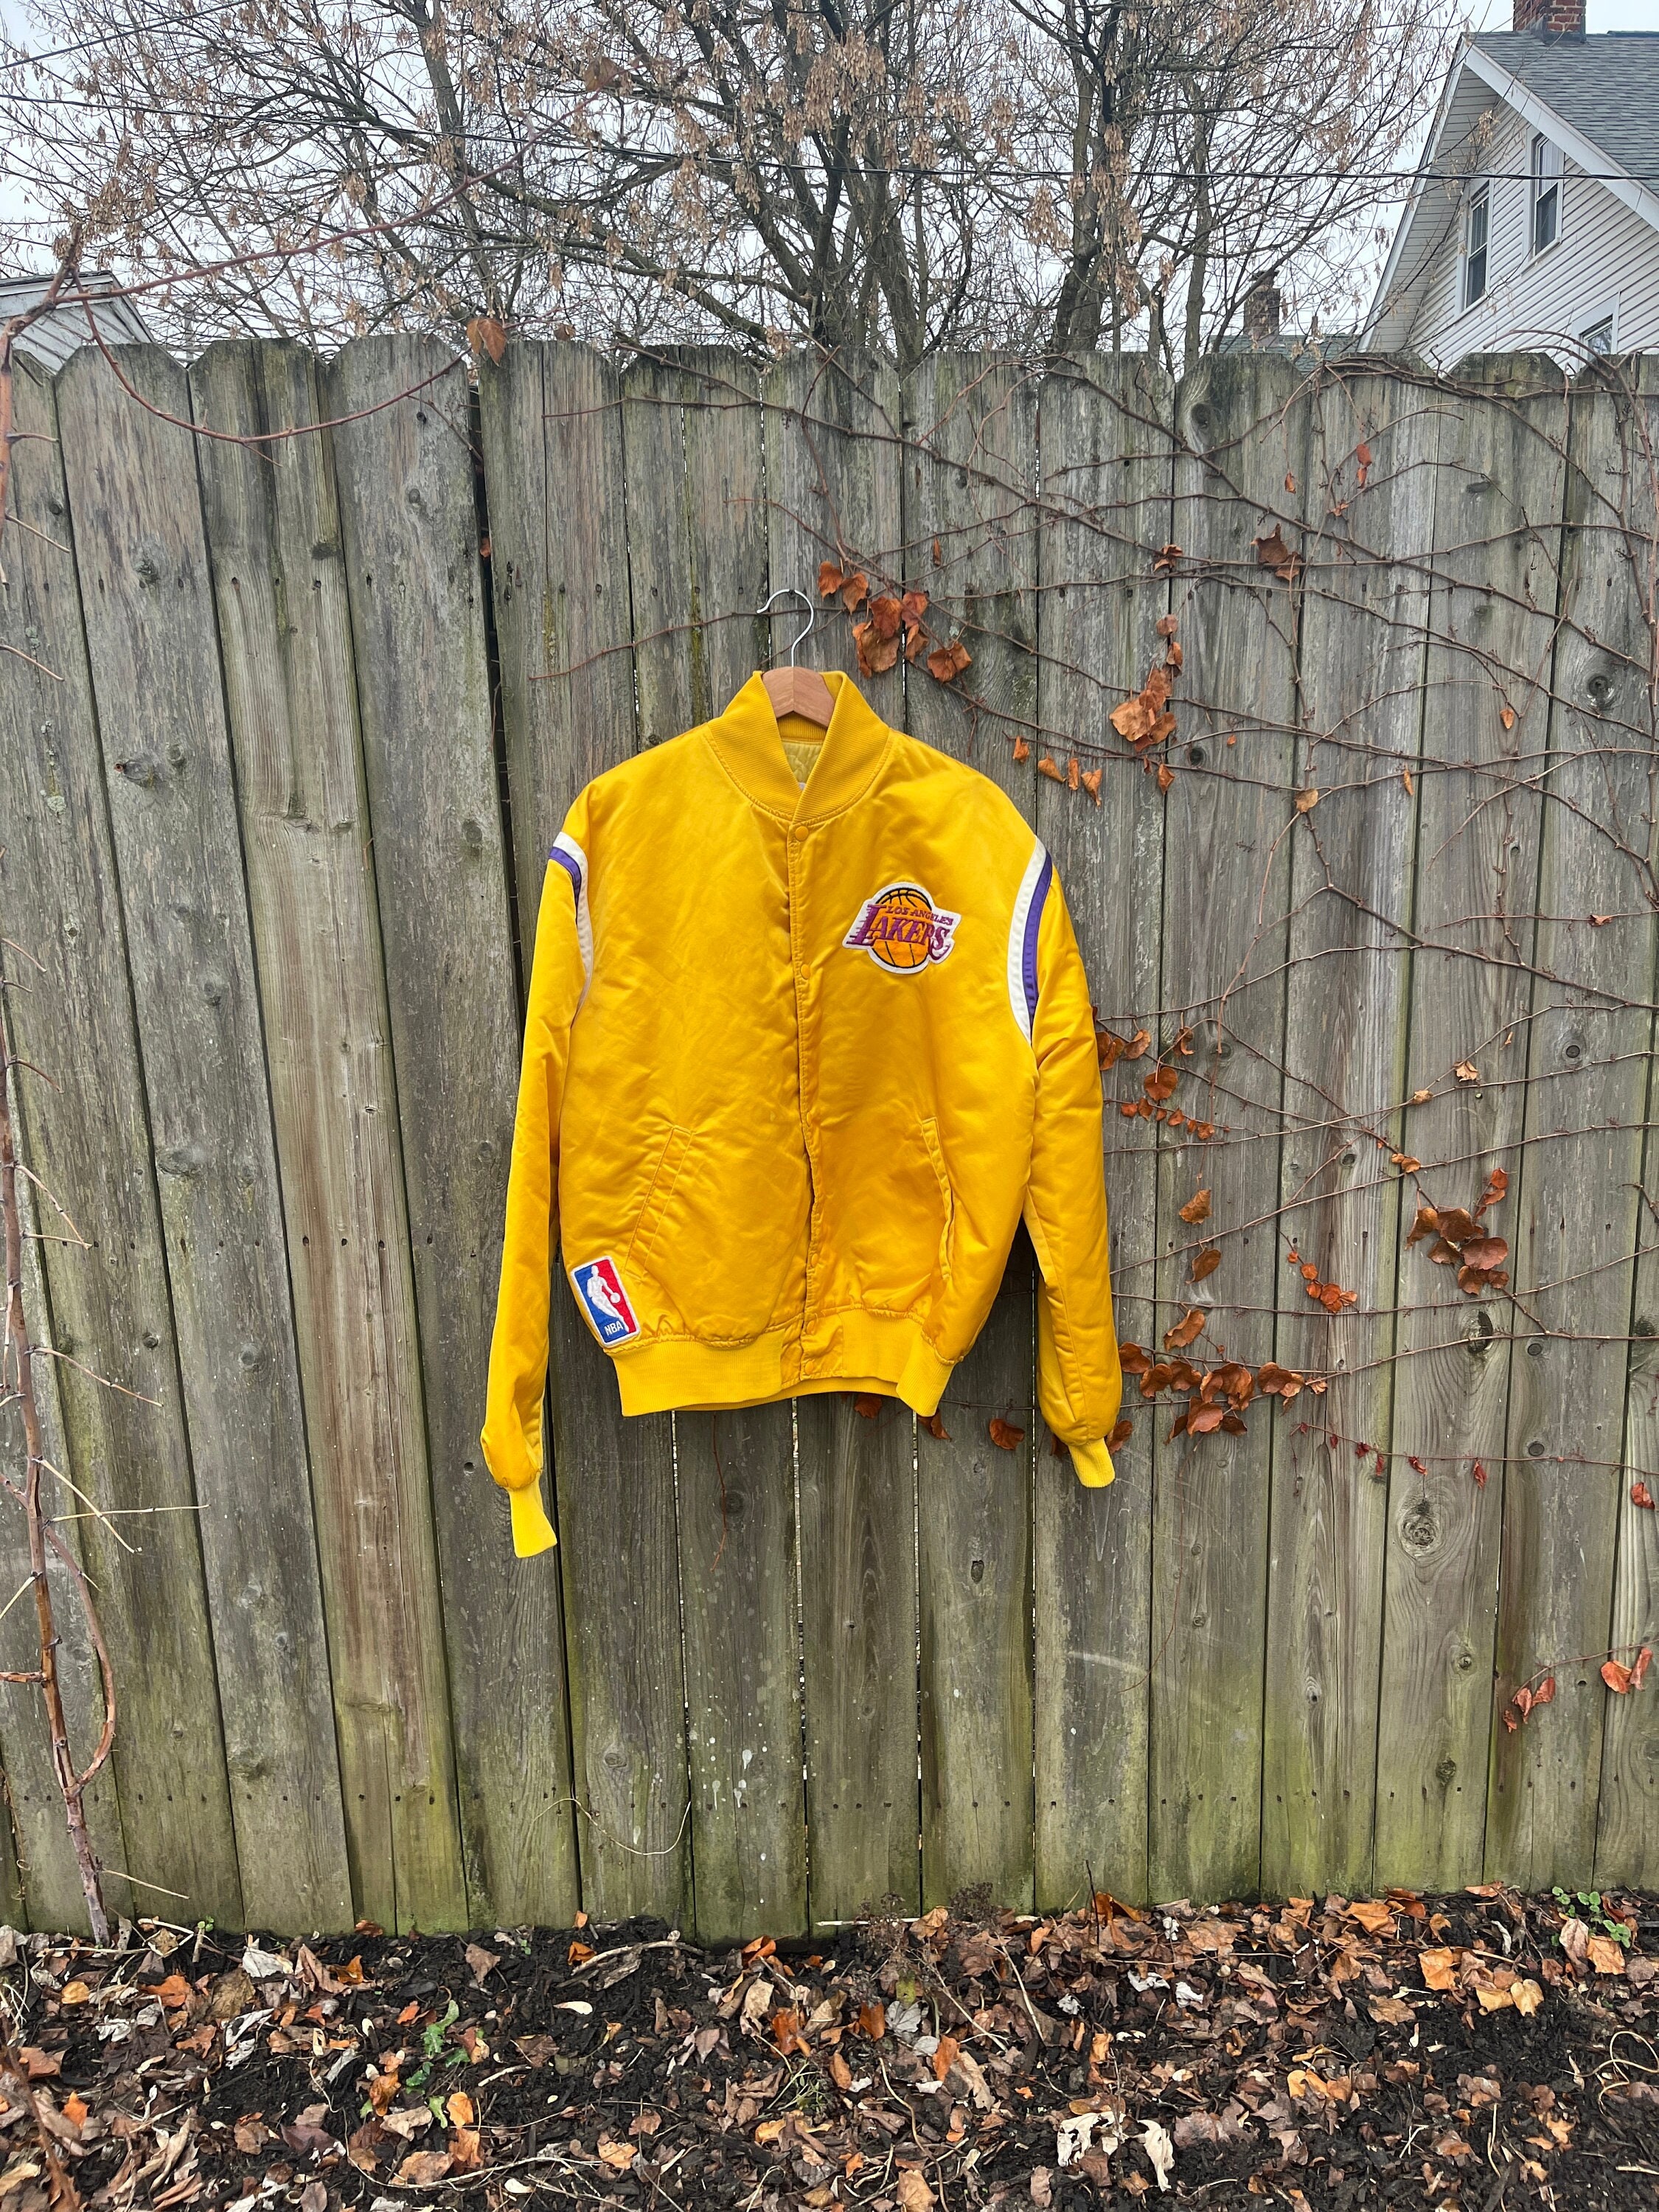 VINTAGE LOS ANGELES LAKERS NBA STARTER SATIN JACKET MADE IN USA ADULT SIZE L